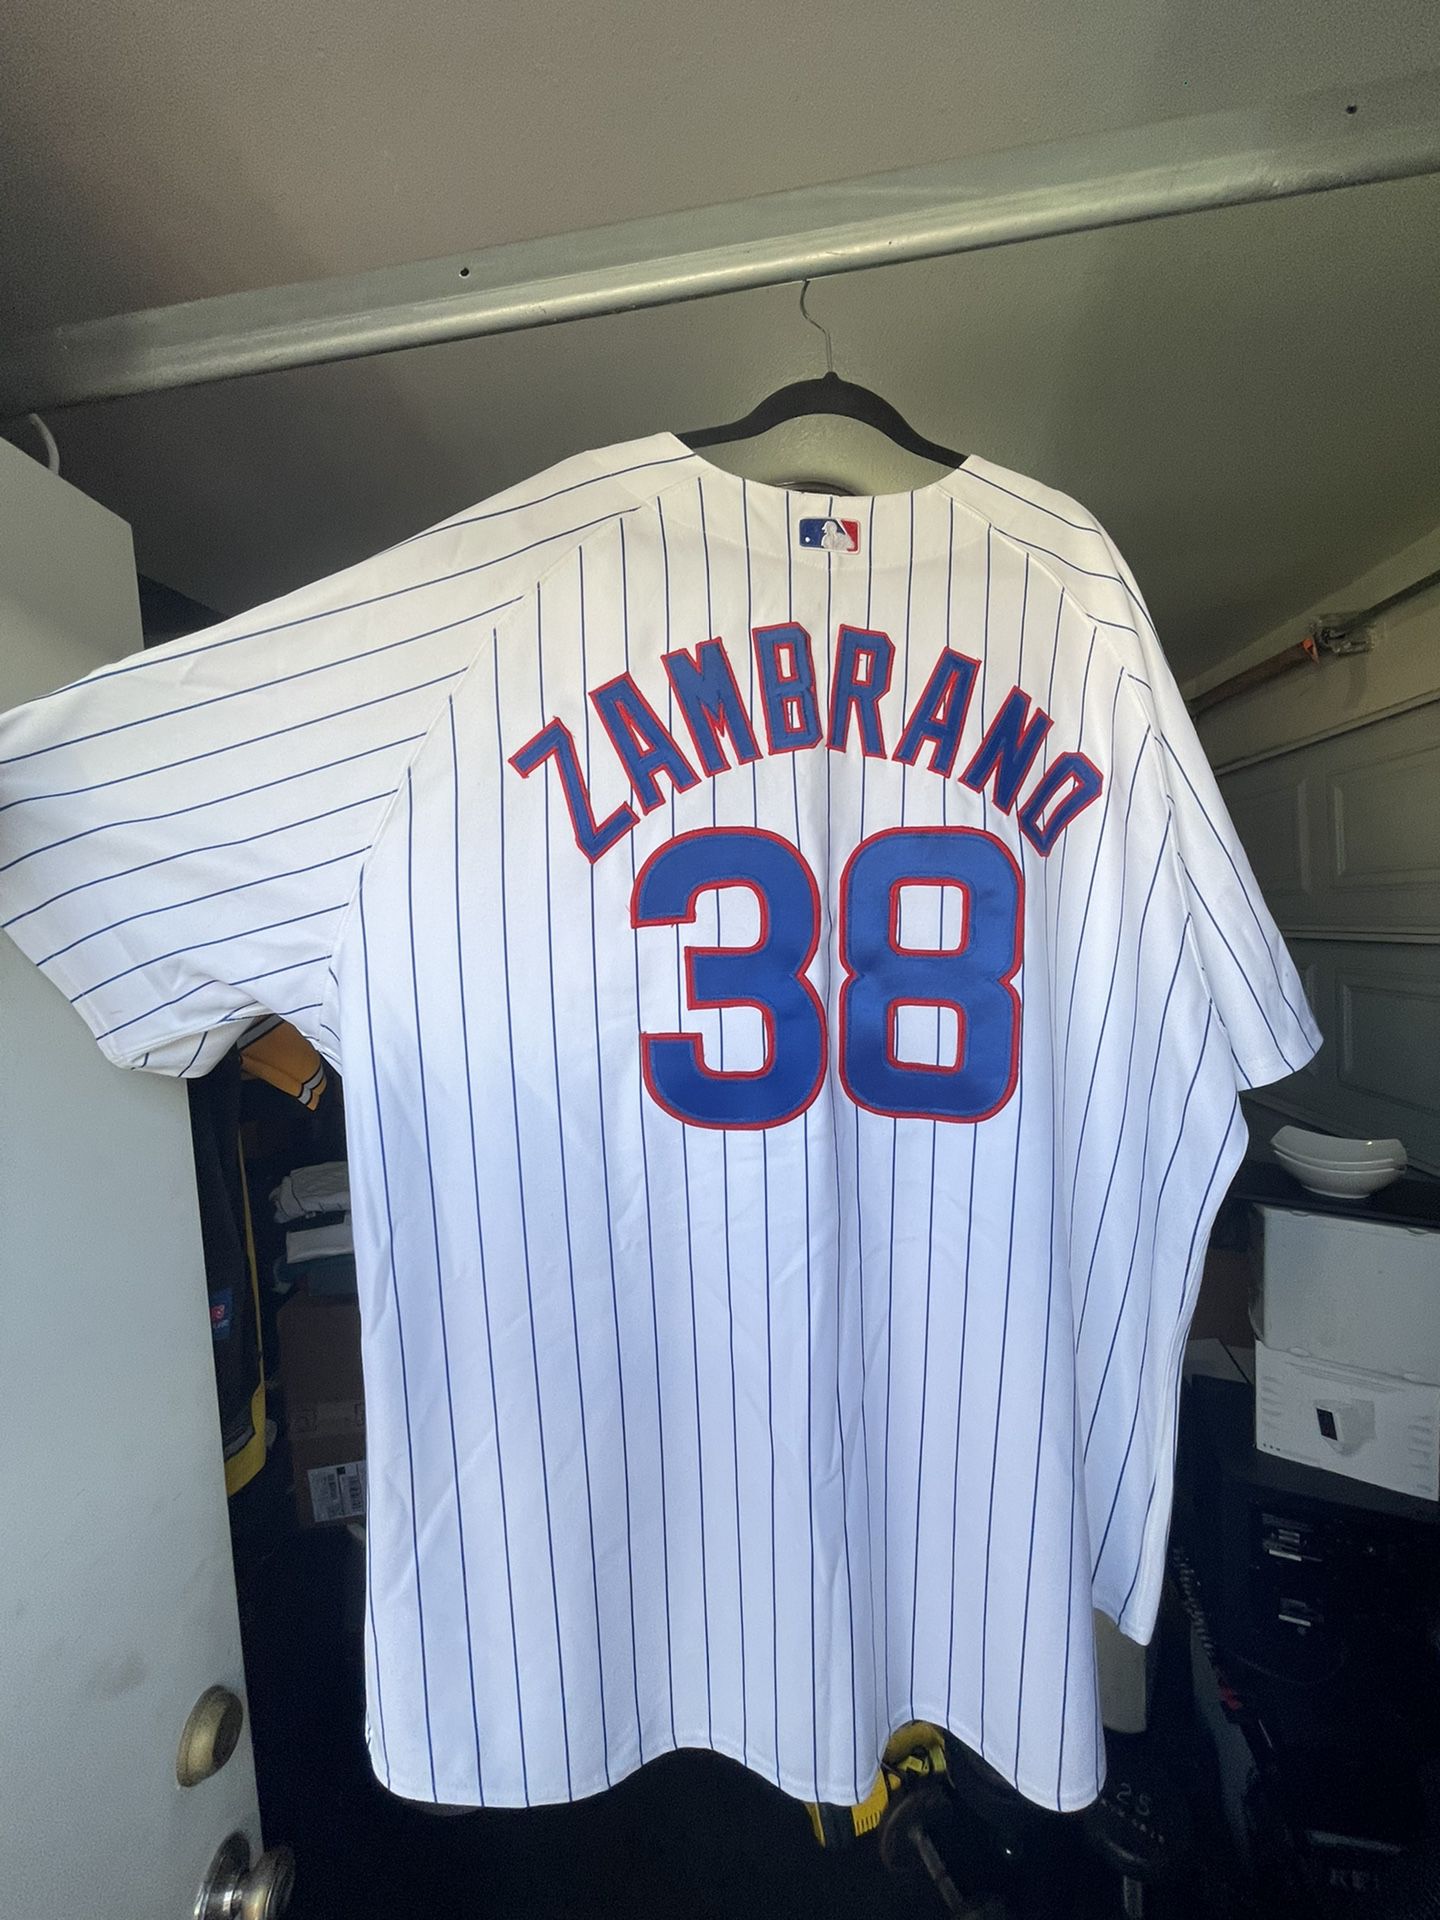 Carlos Zambrano #38 Chicago Cubs Pinstripe Home Jersey